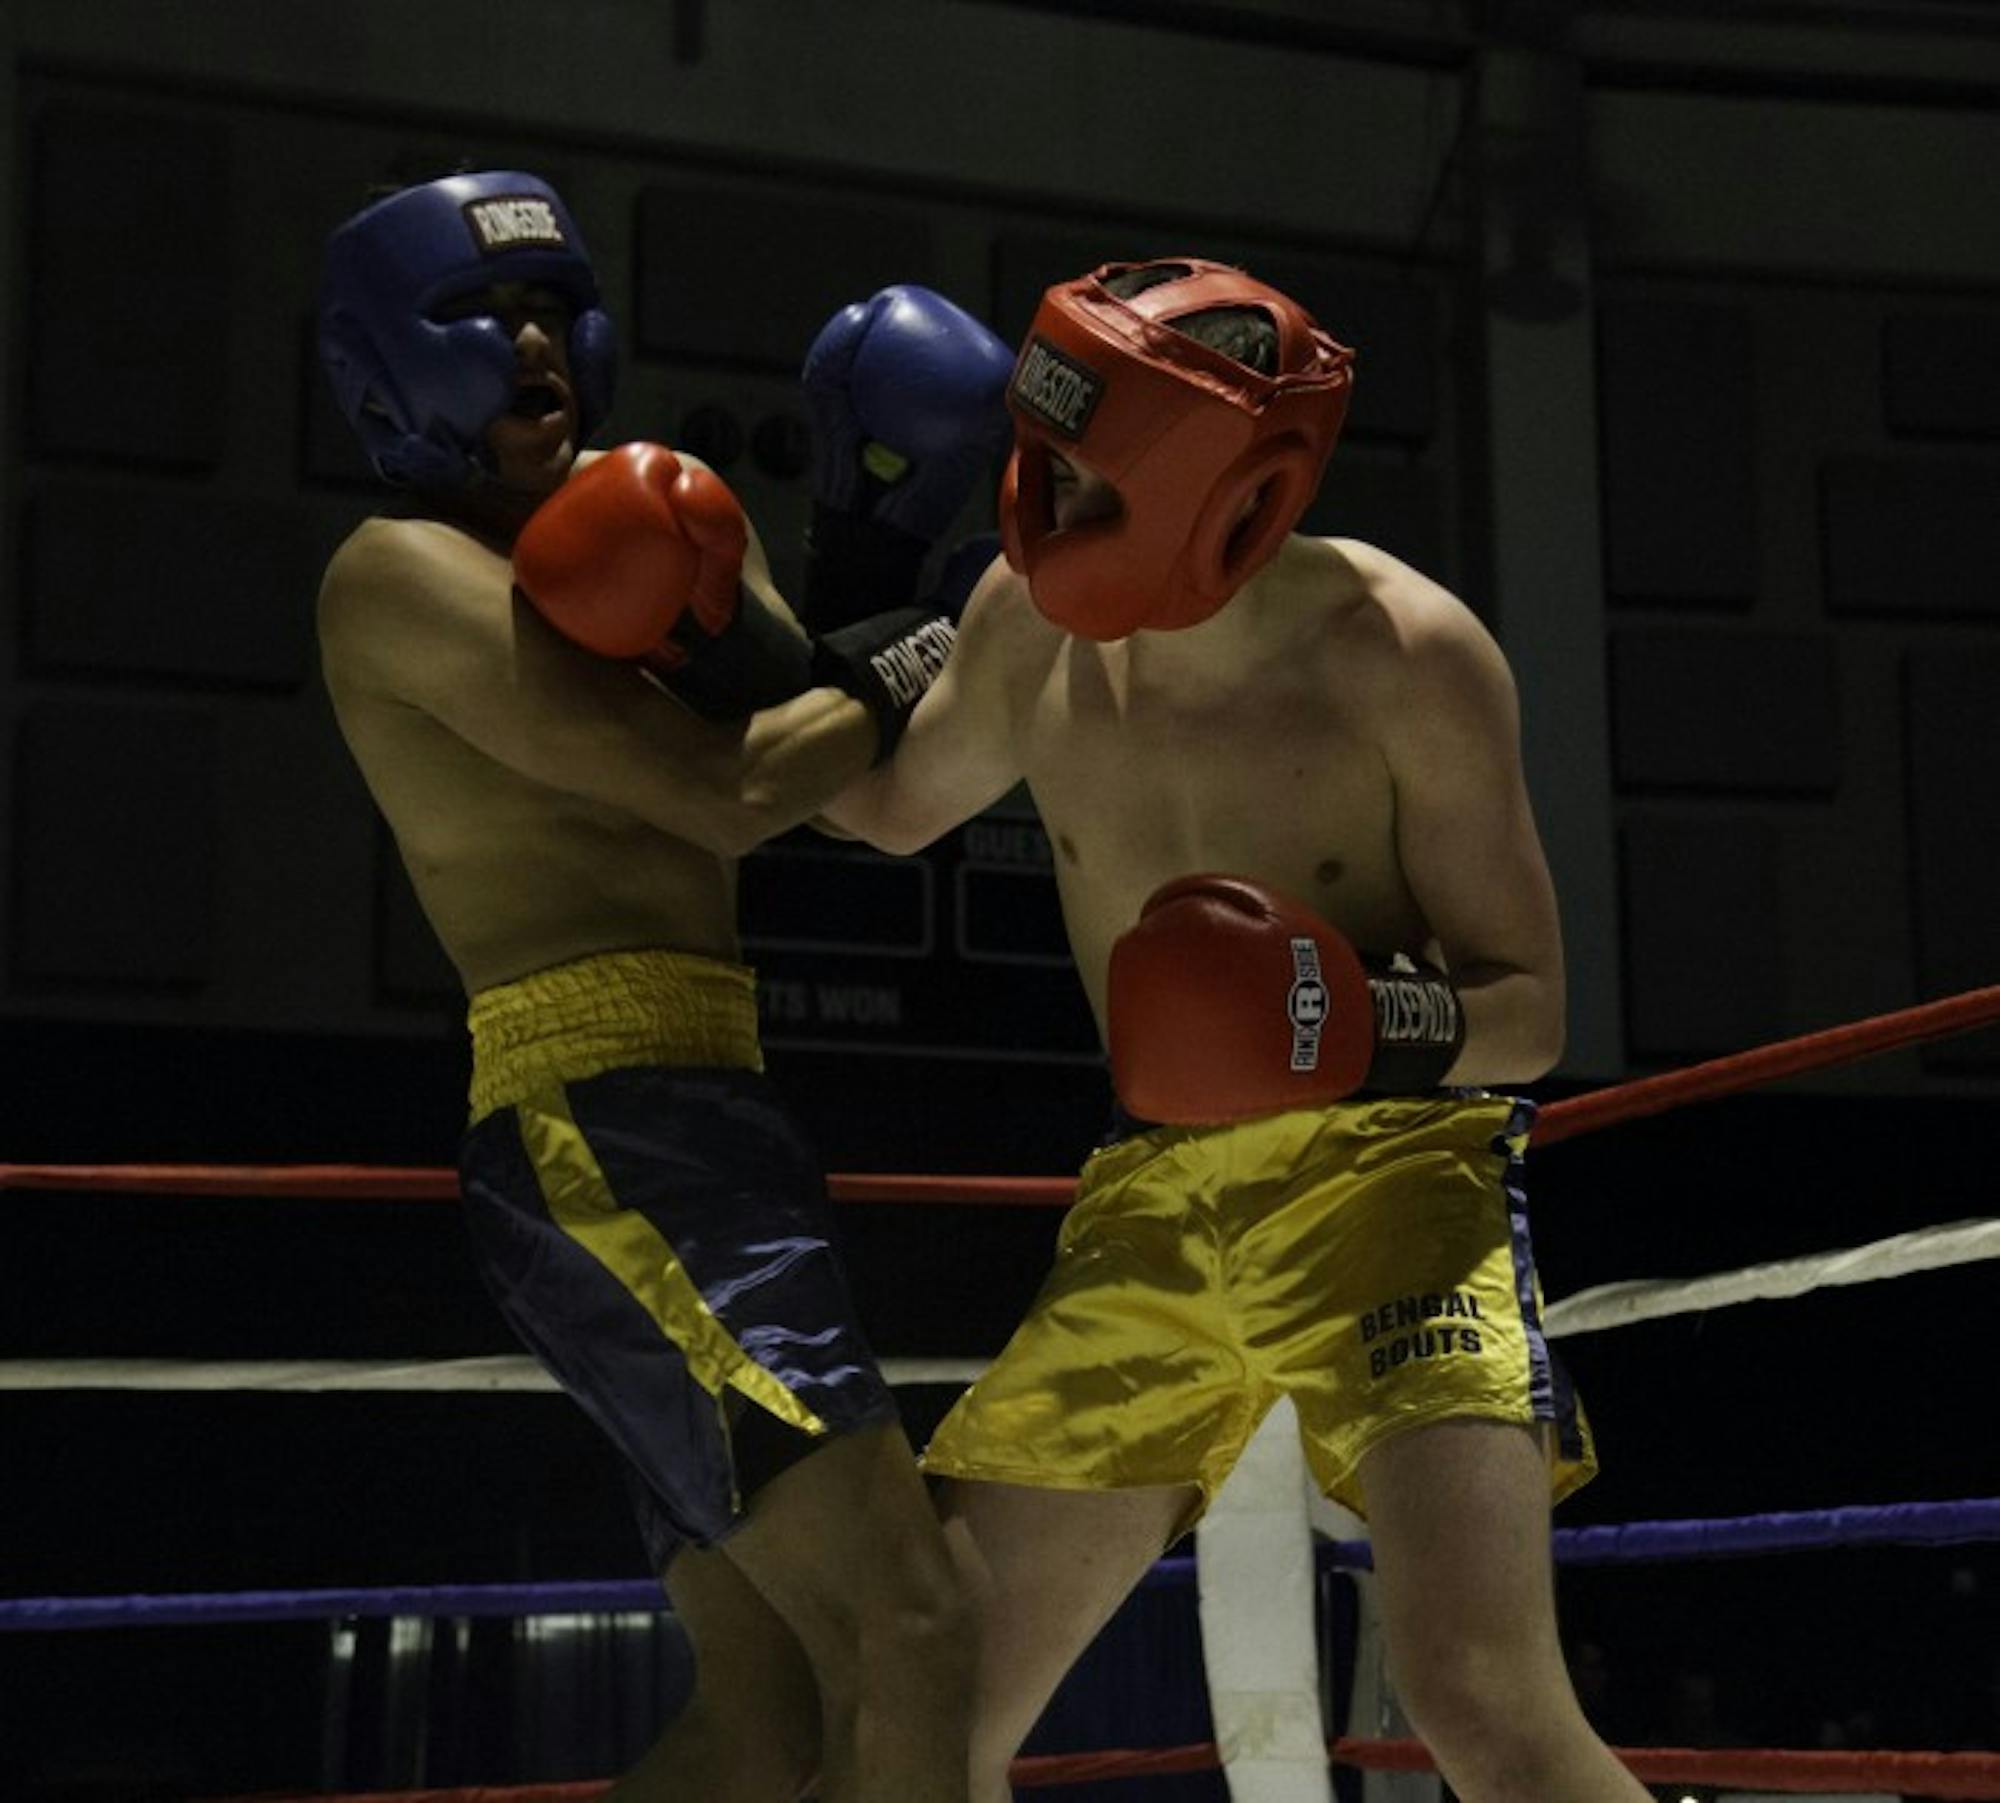 Junior Conor Ward, right, tangles with his opponent, sophomore Alfred Duarte, in the preliminary round of the 146-pound division in the 87th annual Bengal Bouts tournament. Ward went on to win the fight.